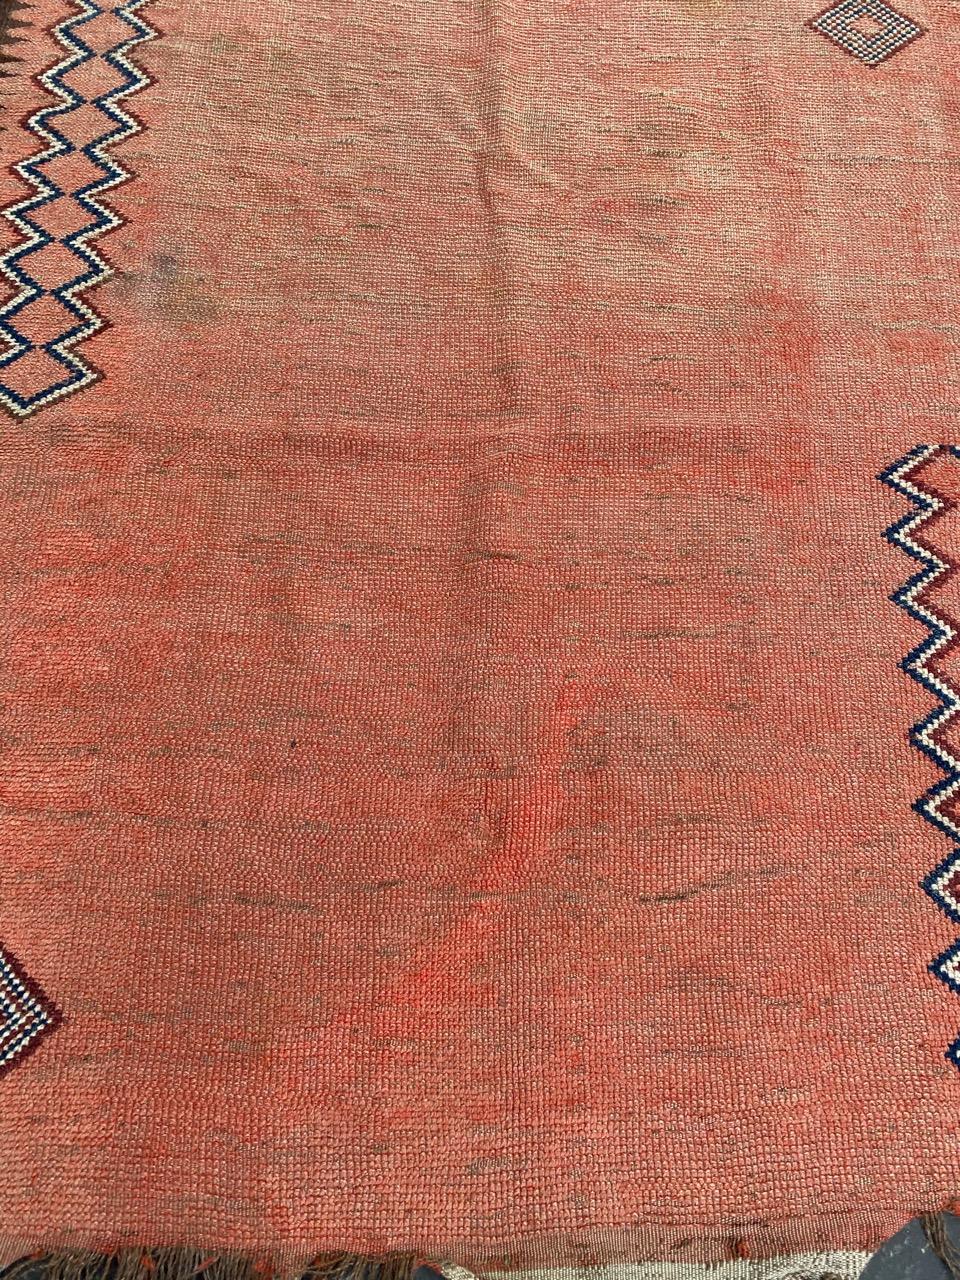 Nice Moroccan rug with a tribal design and an orange field color, entirely hand knotted with wool velvet on wool foundation.